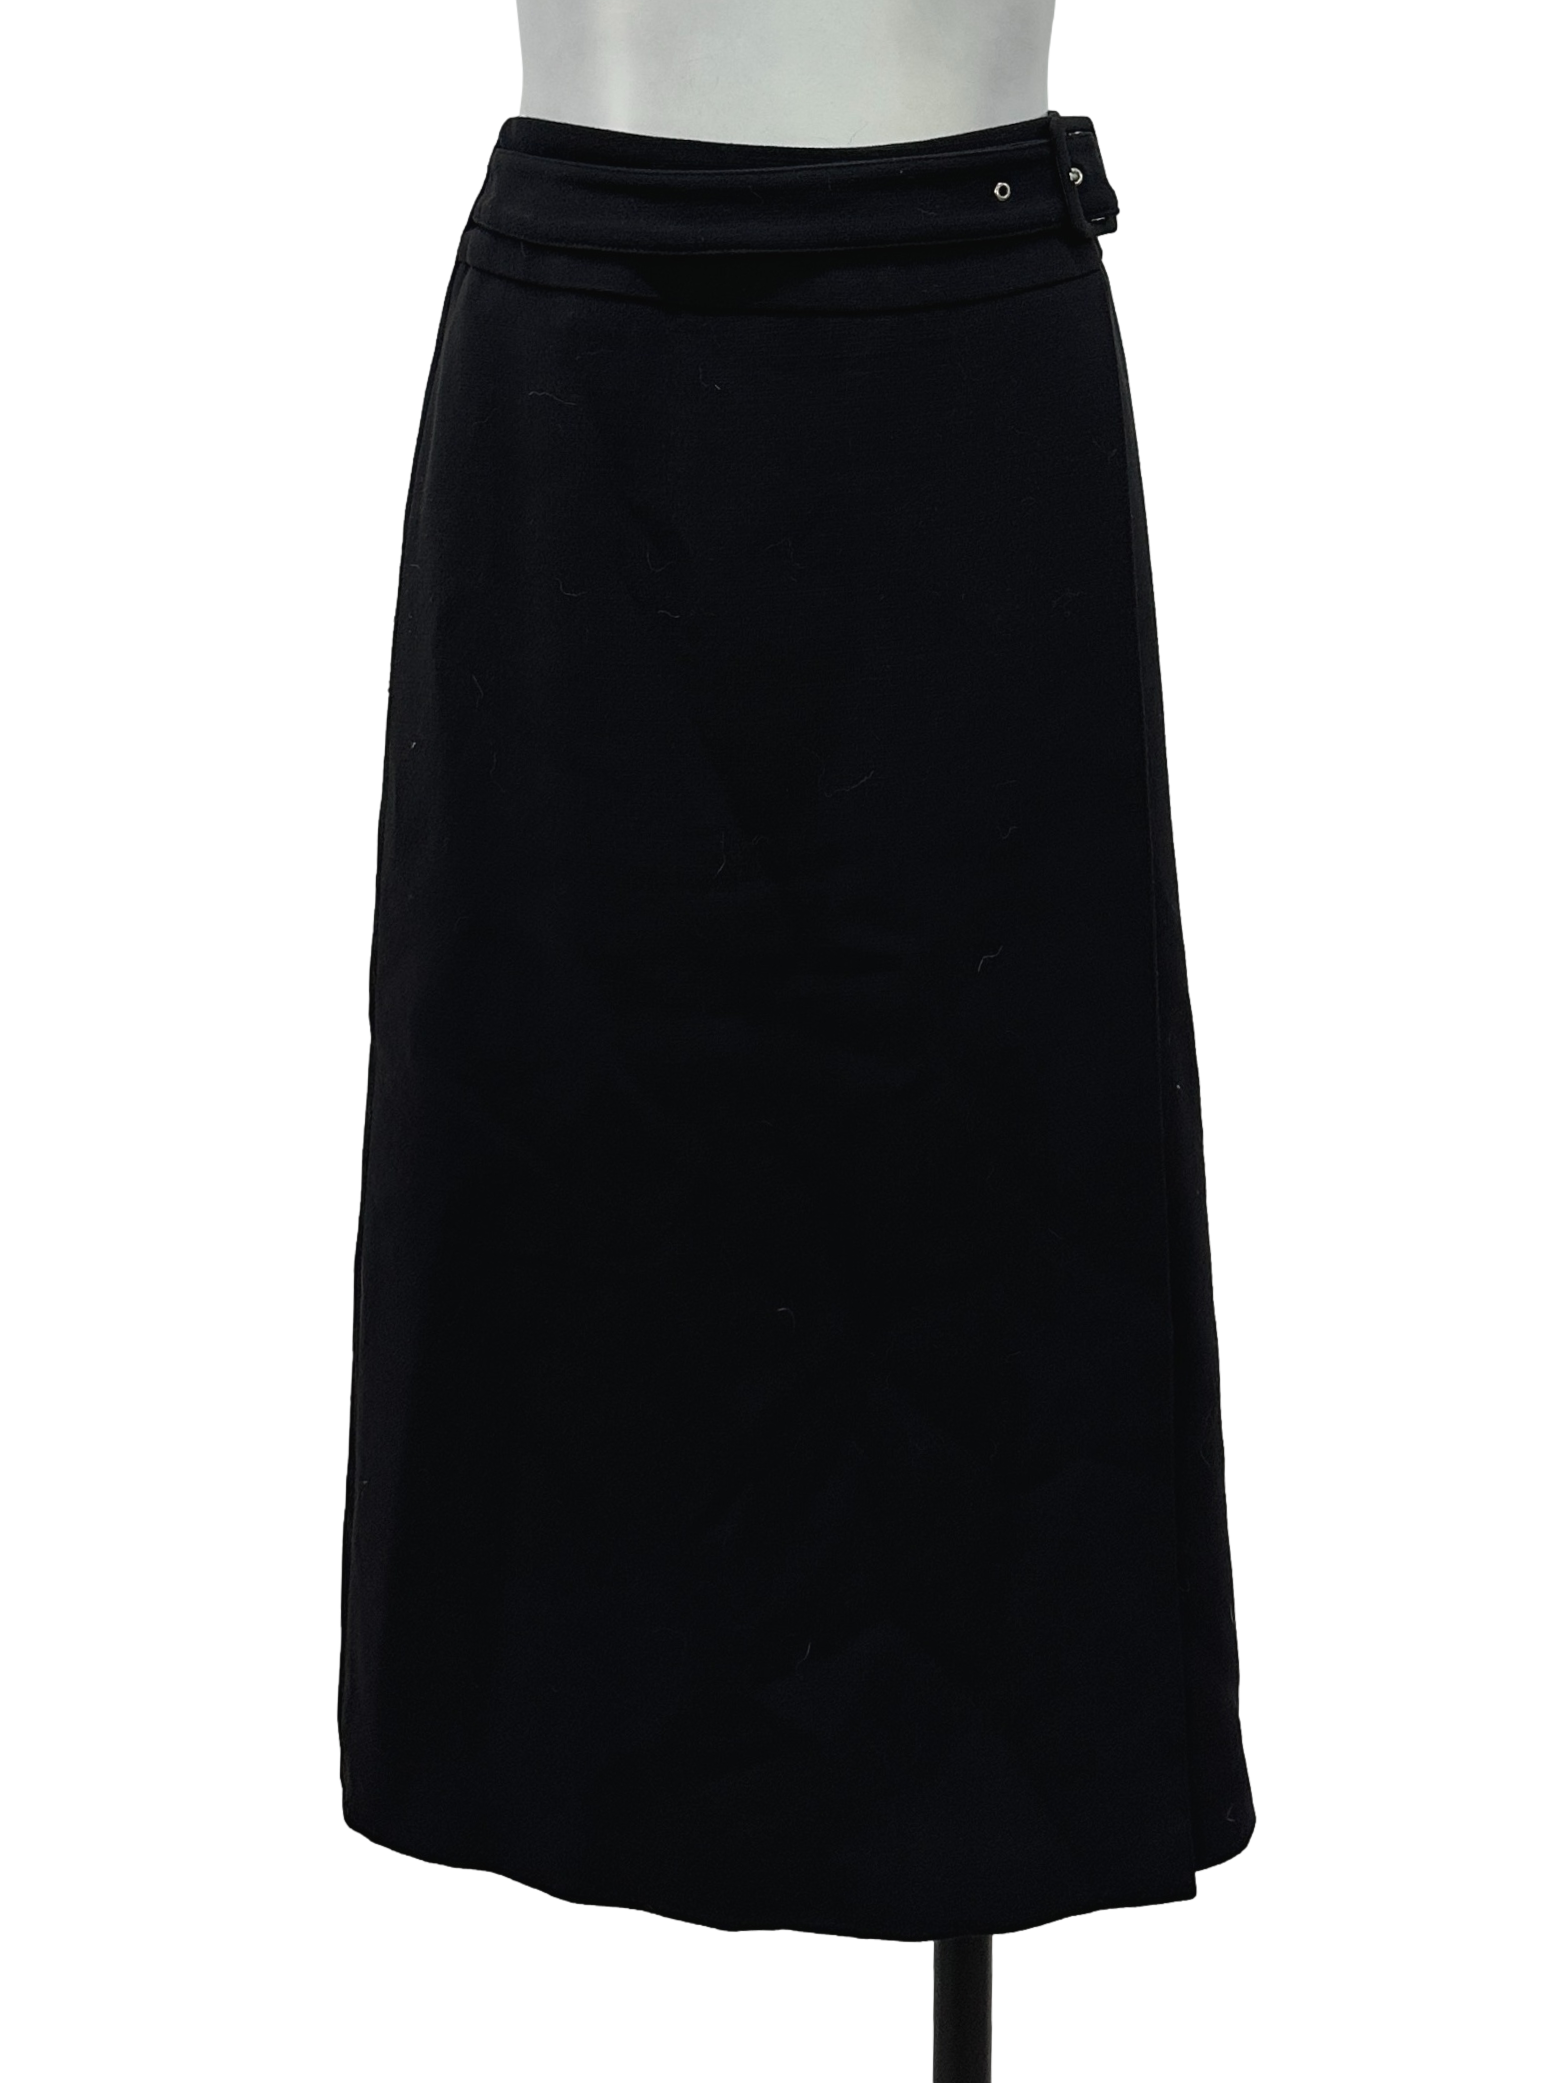 Black Belted Layered Skirt